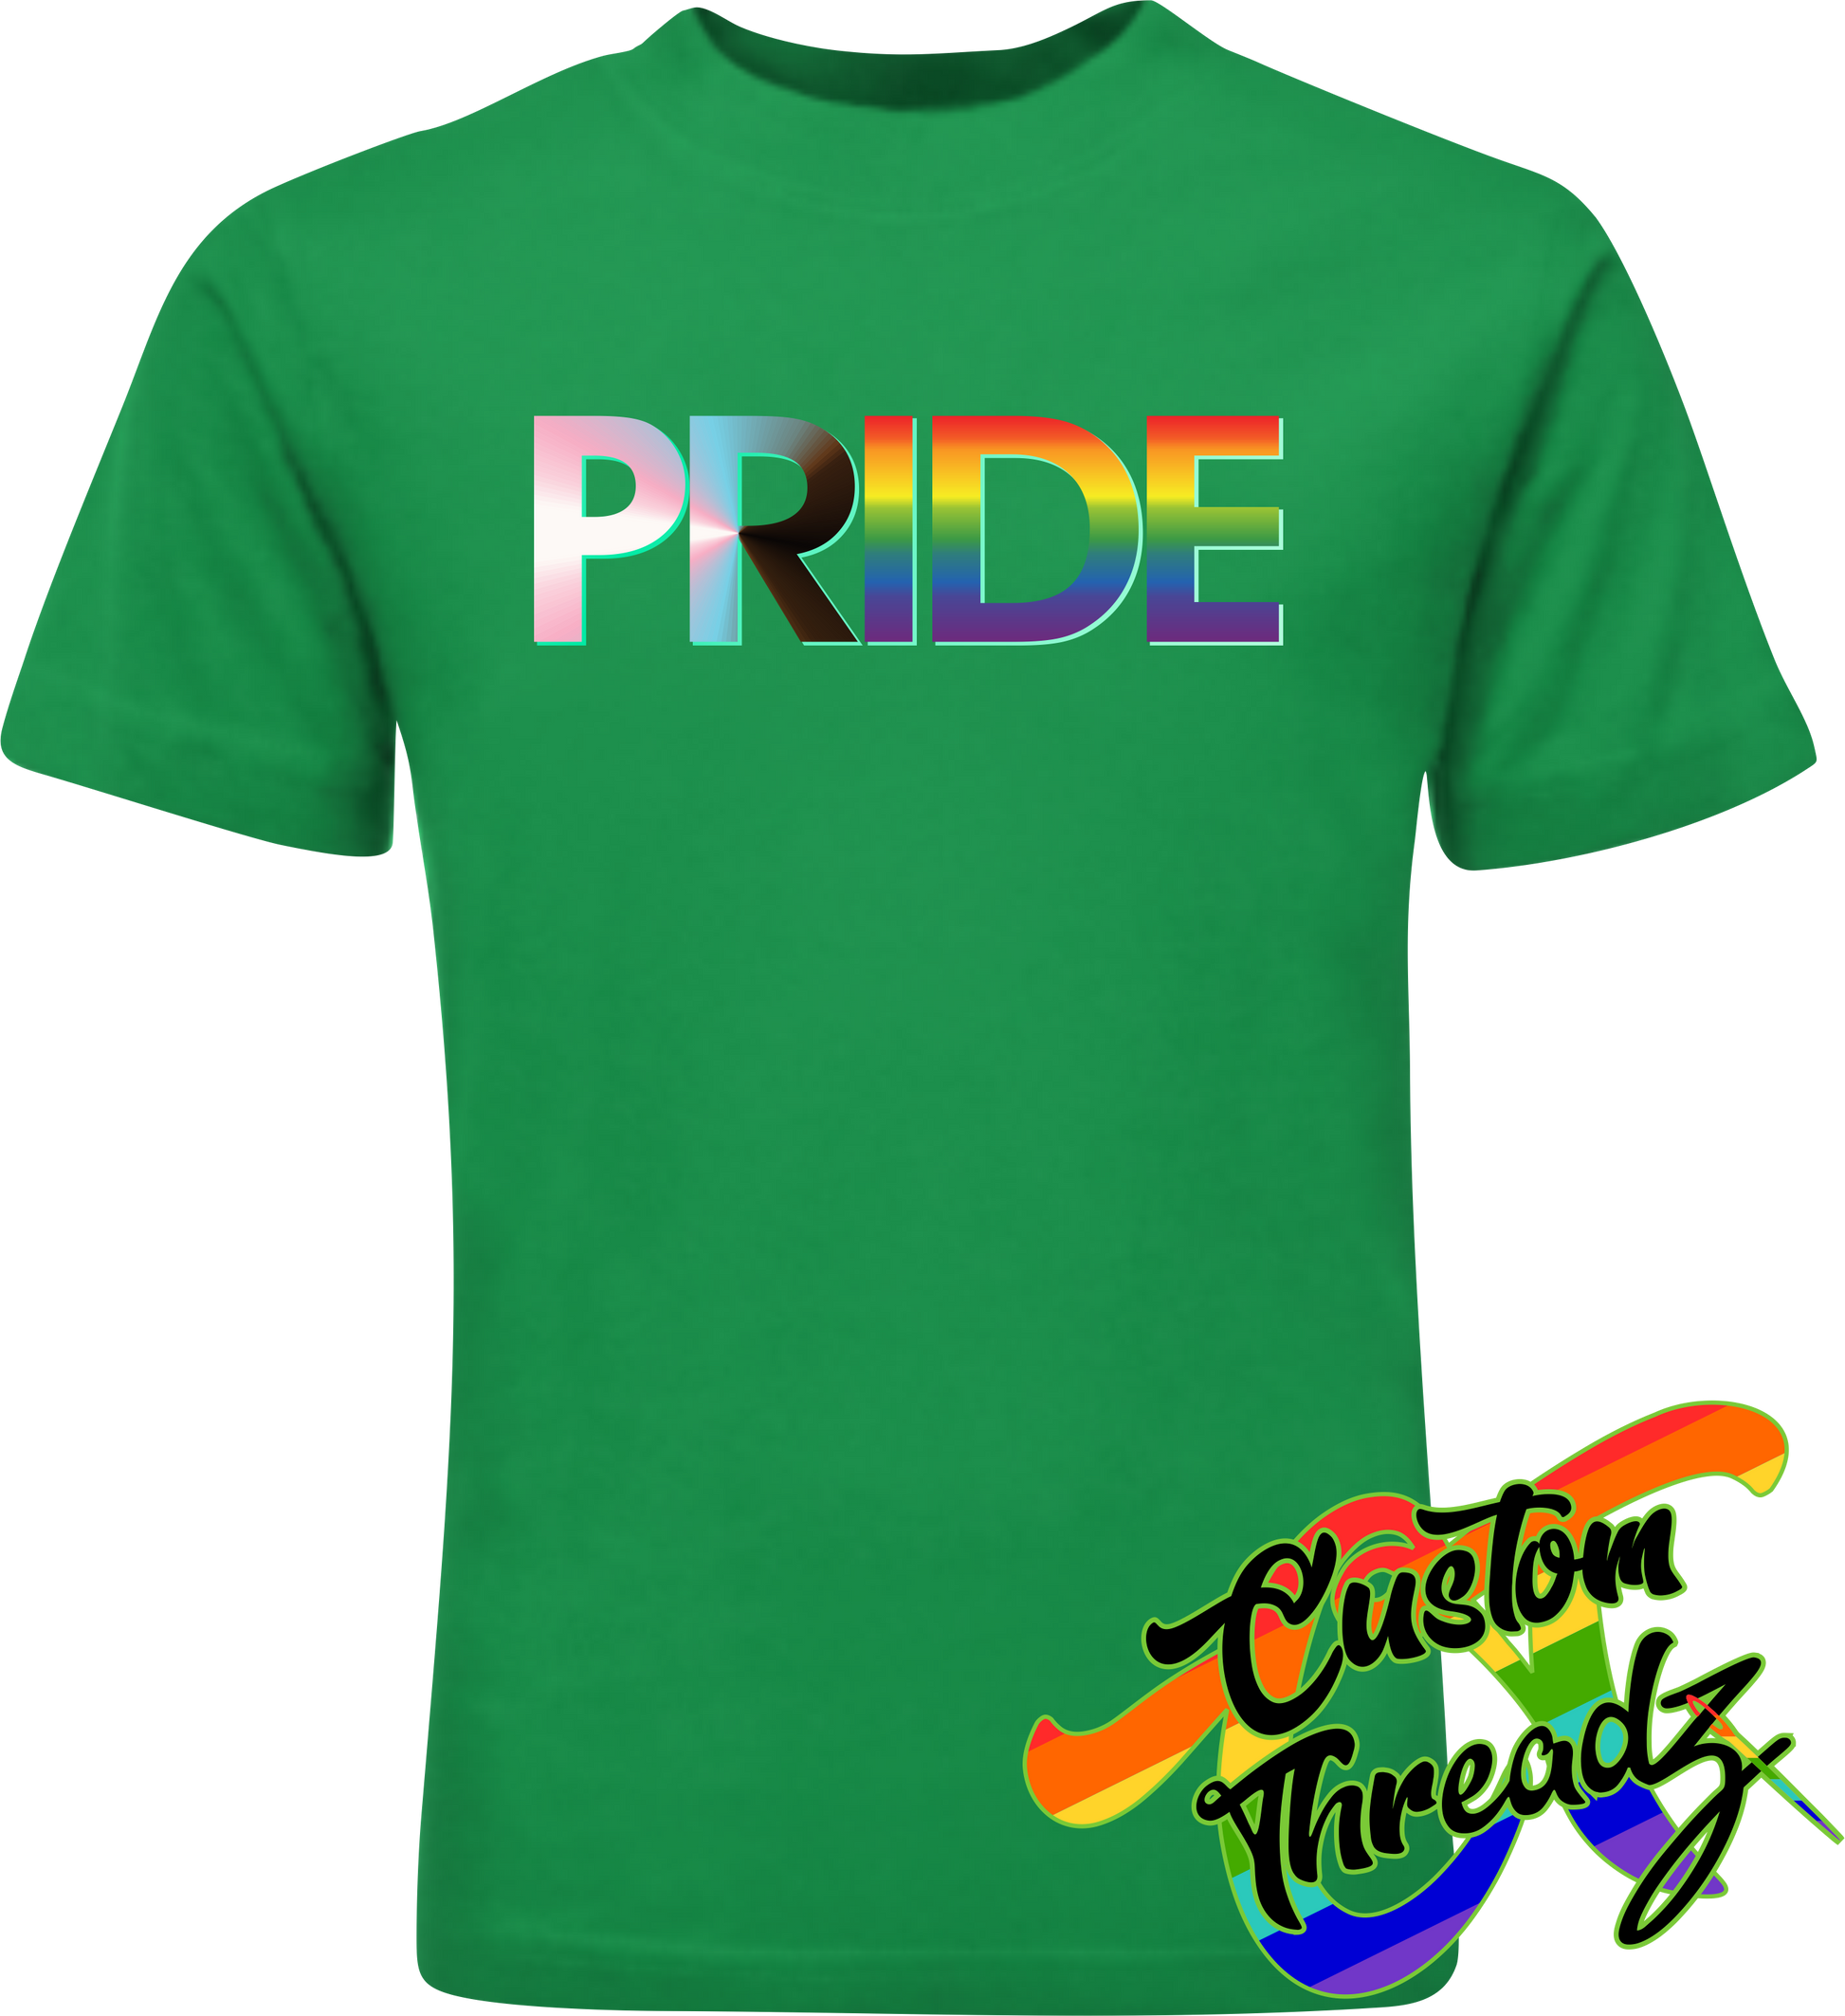 green tee with progress pride flag DTG printed design